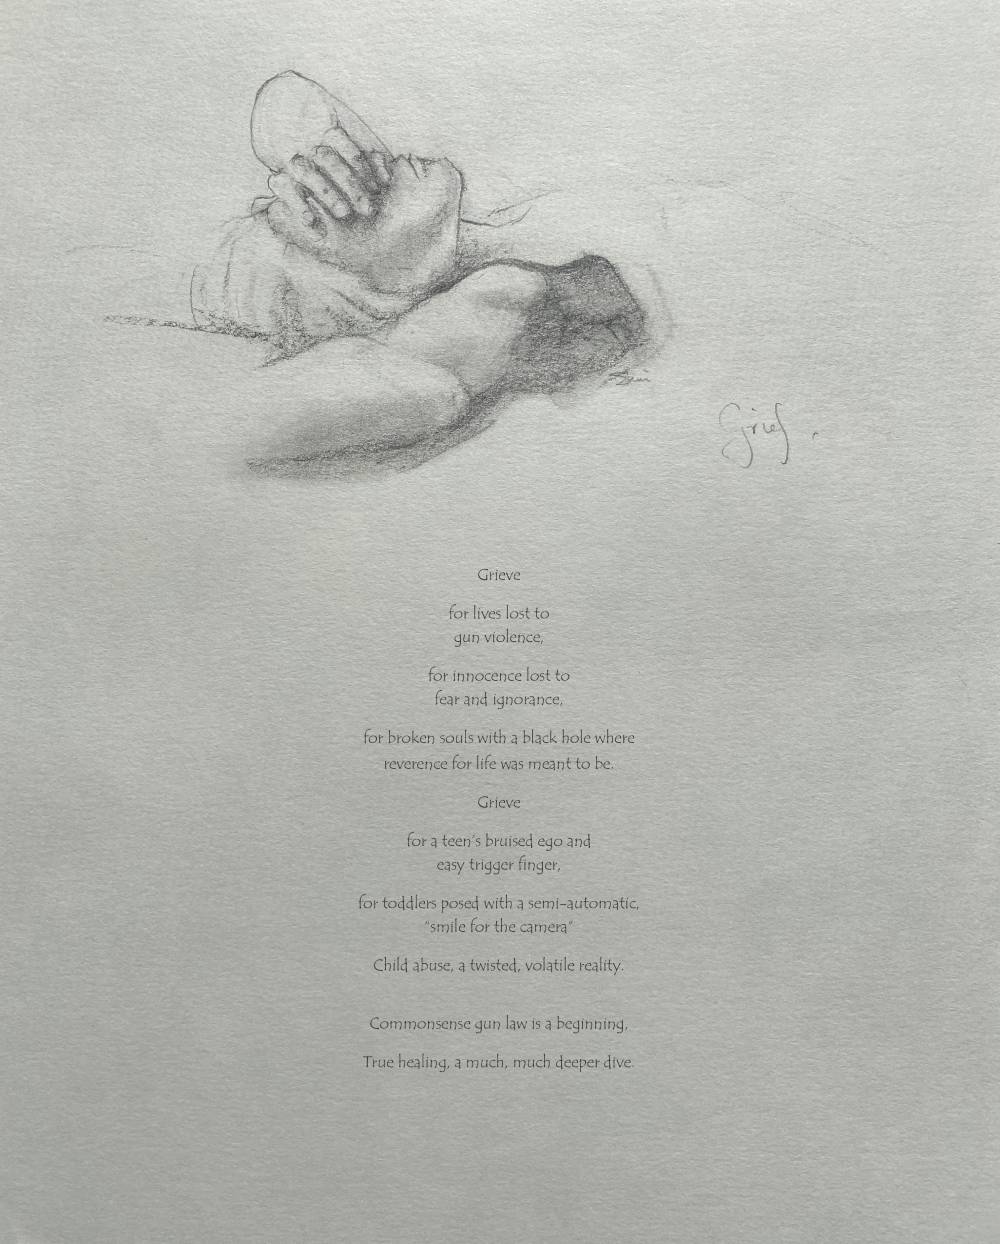 Grief, 2021, graphite drawing, 9×11